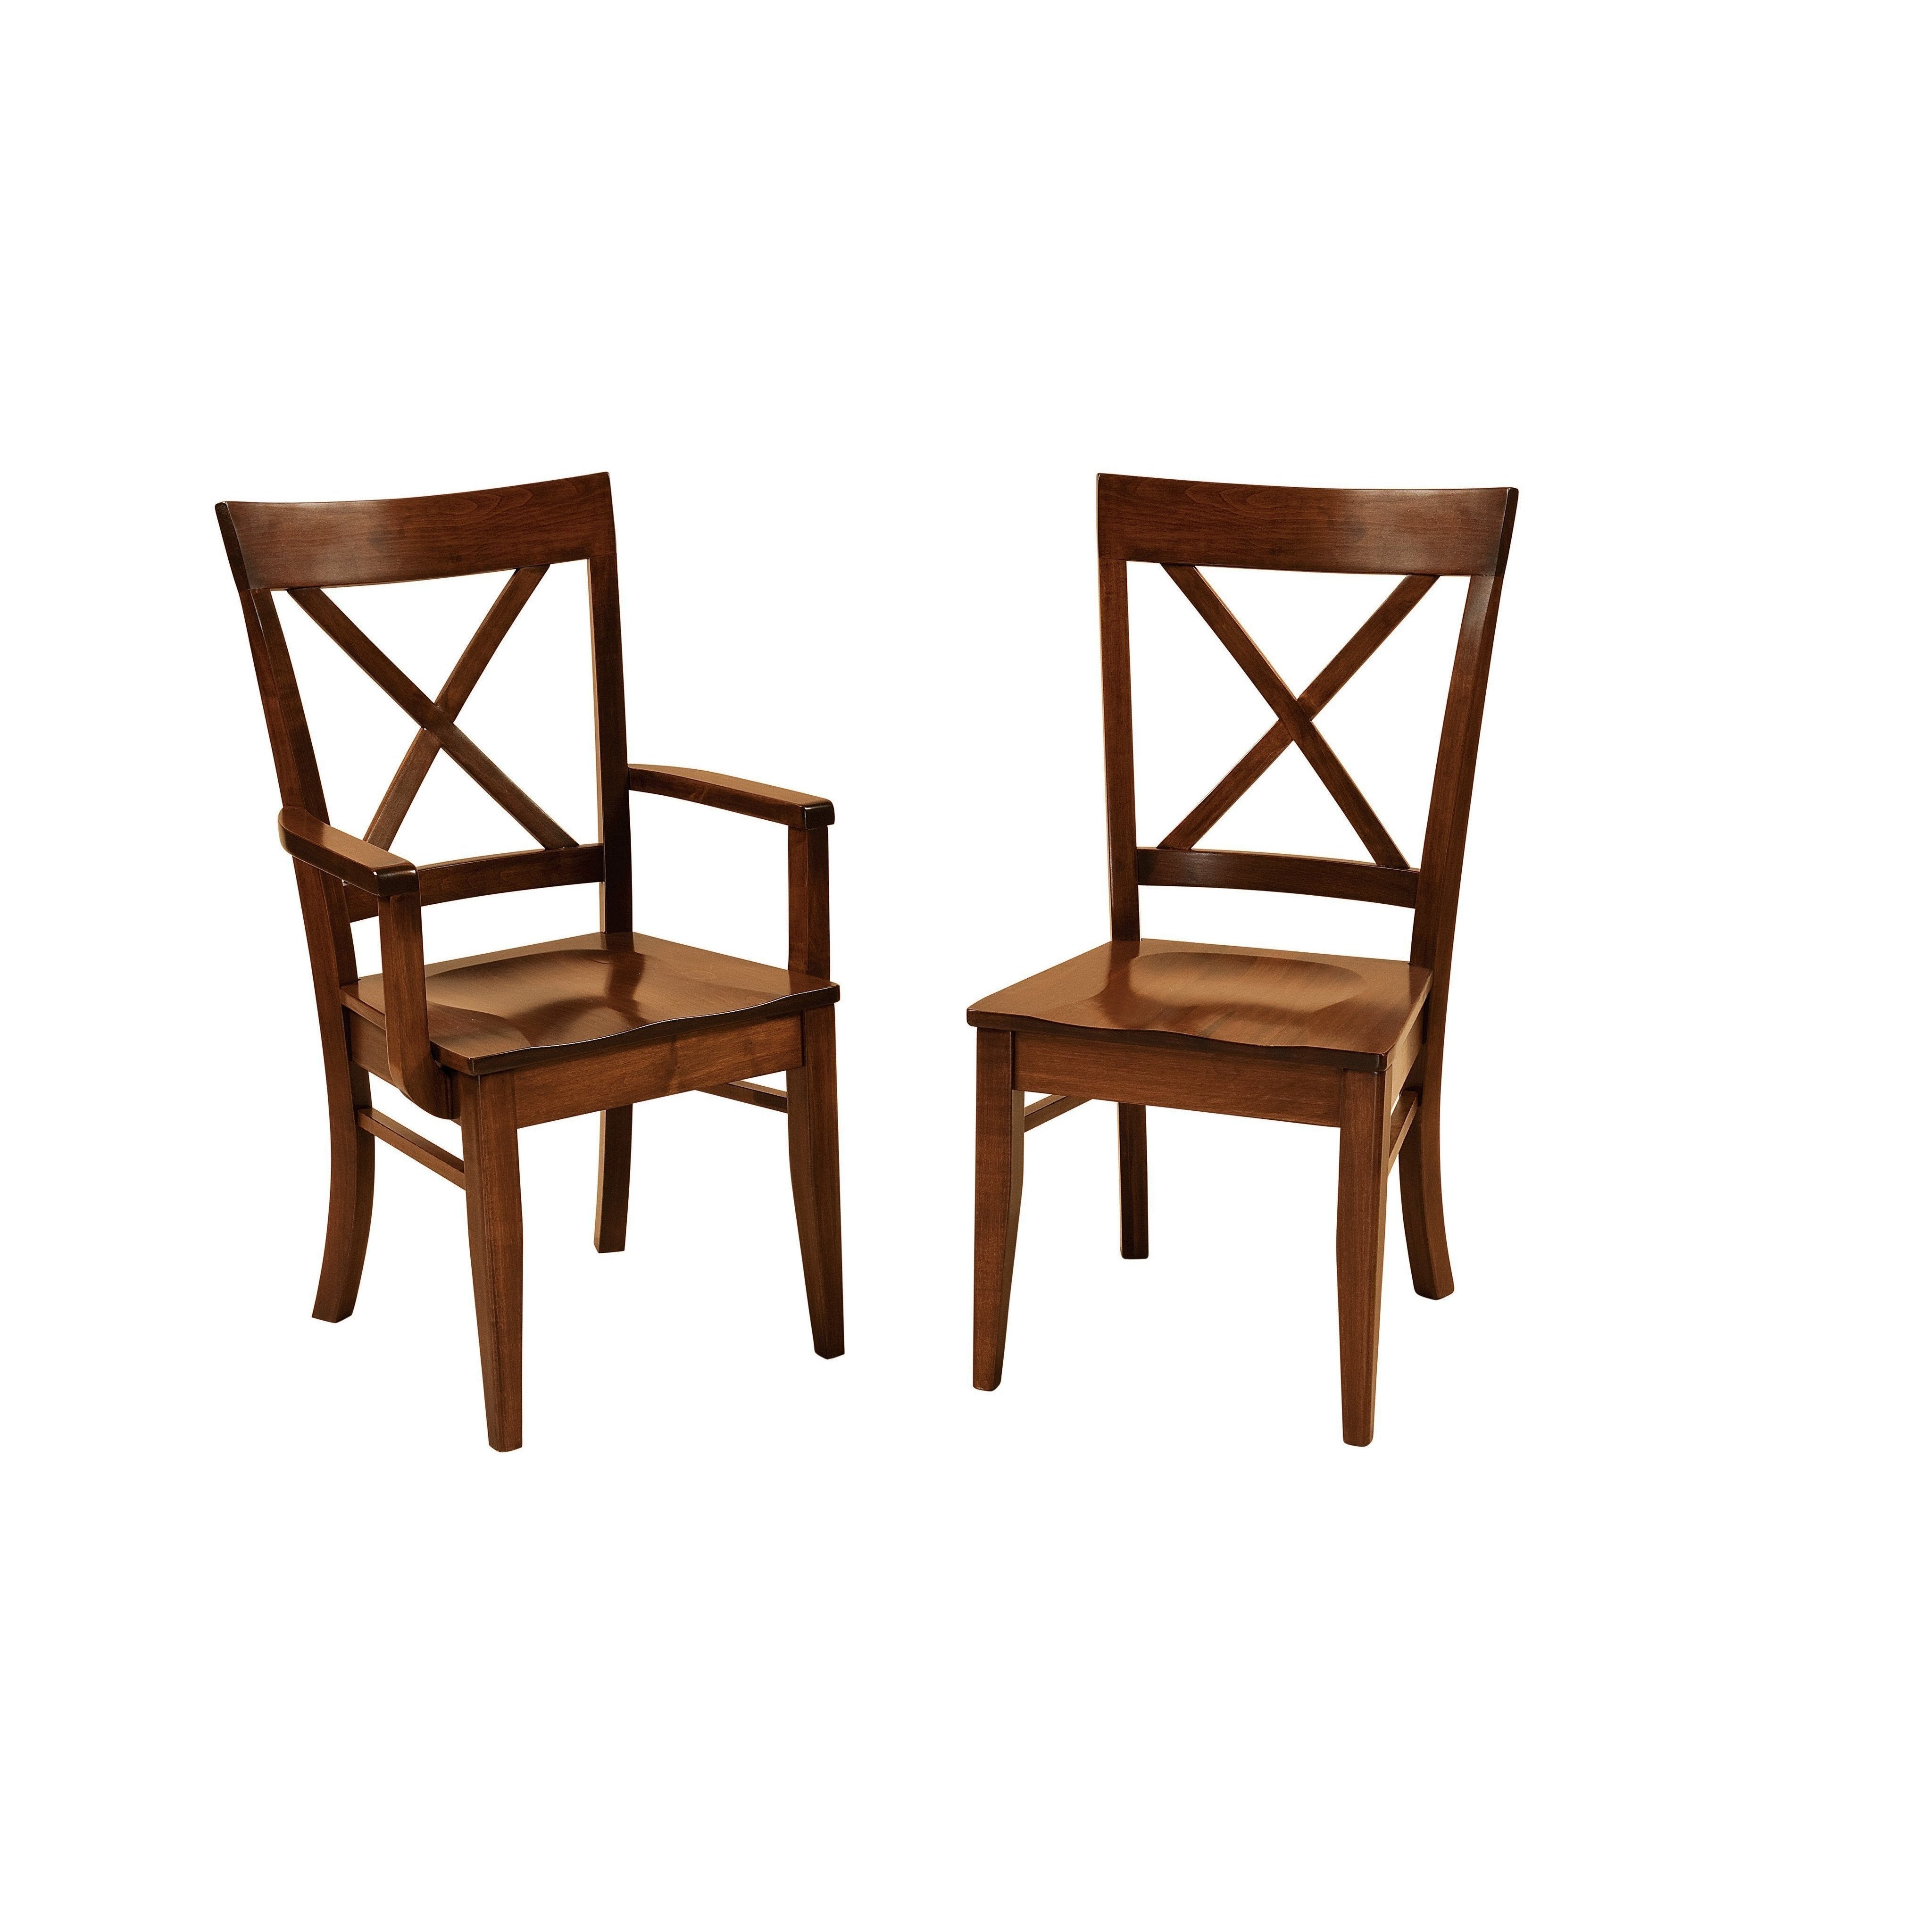 frontier-chairs-260135.jpg